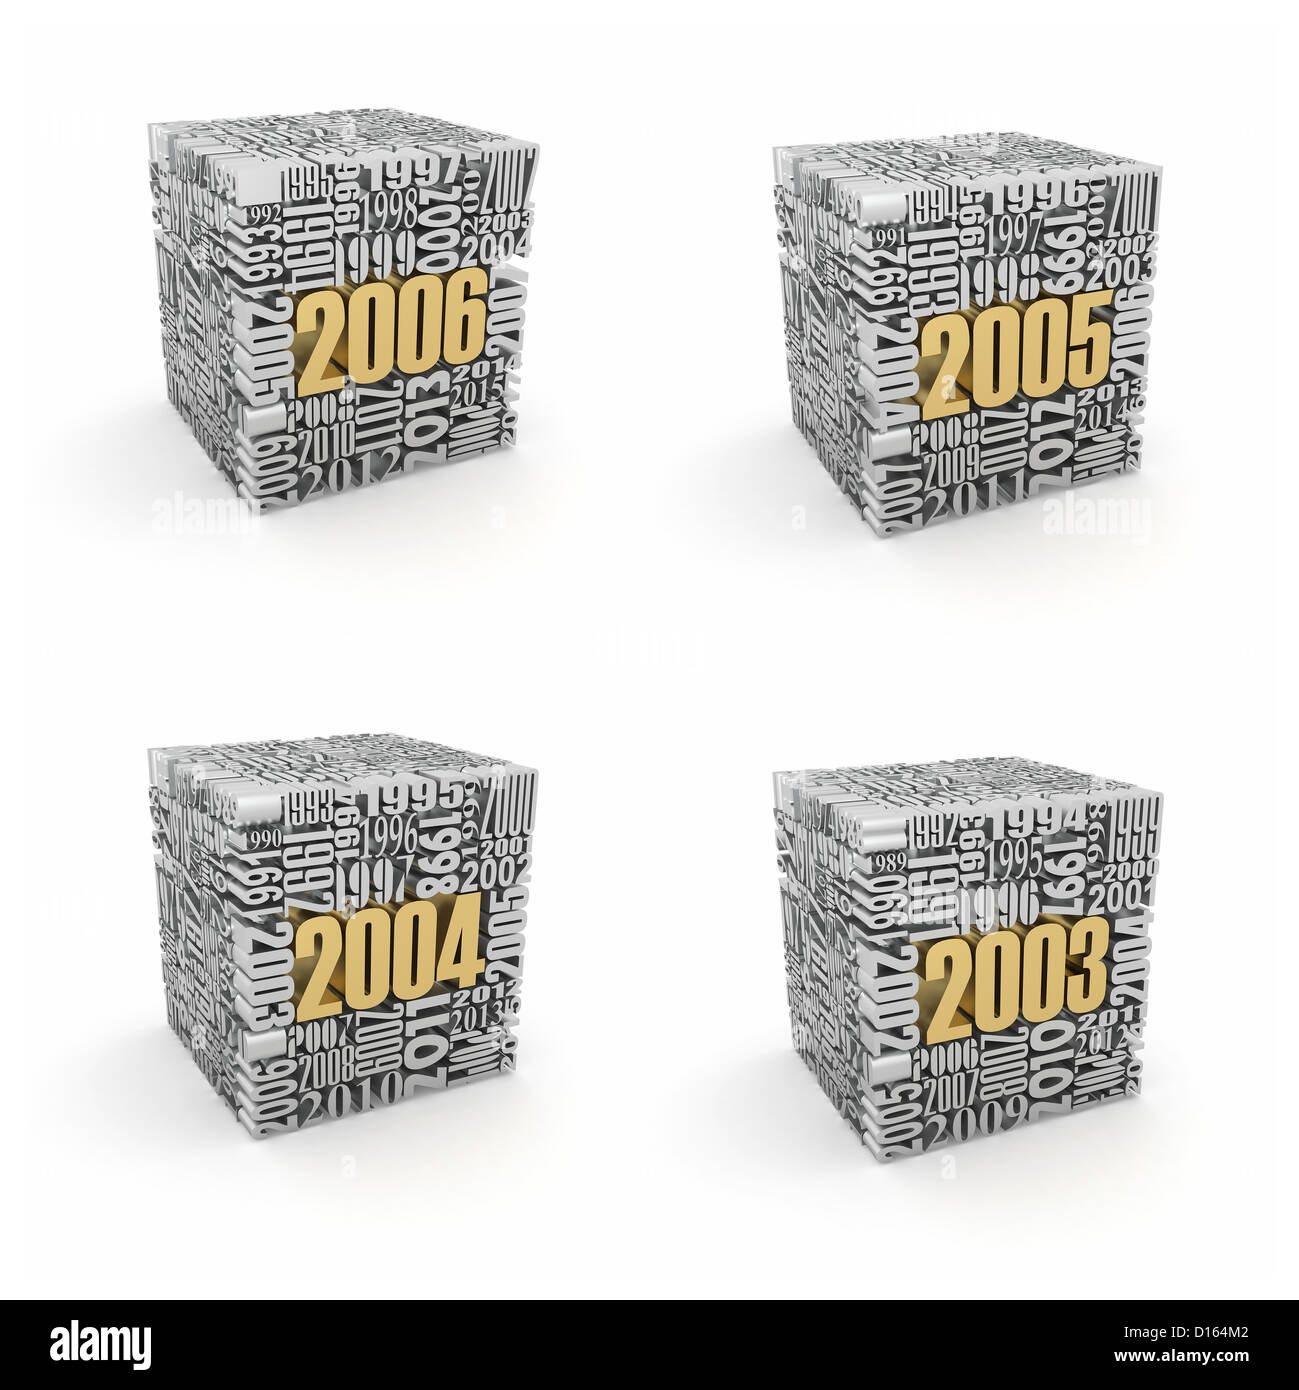 New year 2006, 2005, 2004, 2003. Cube consisting of the numbers. 3d Stock Photo